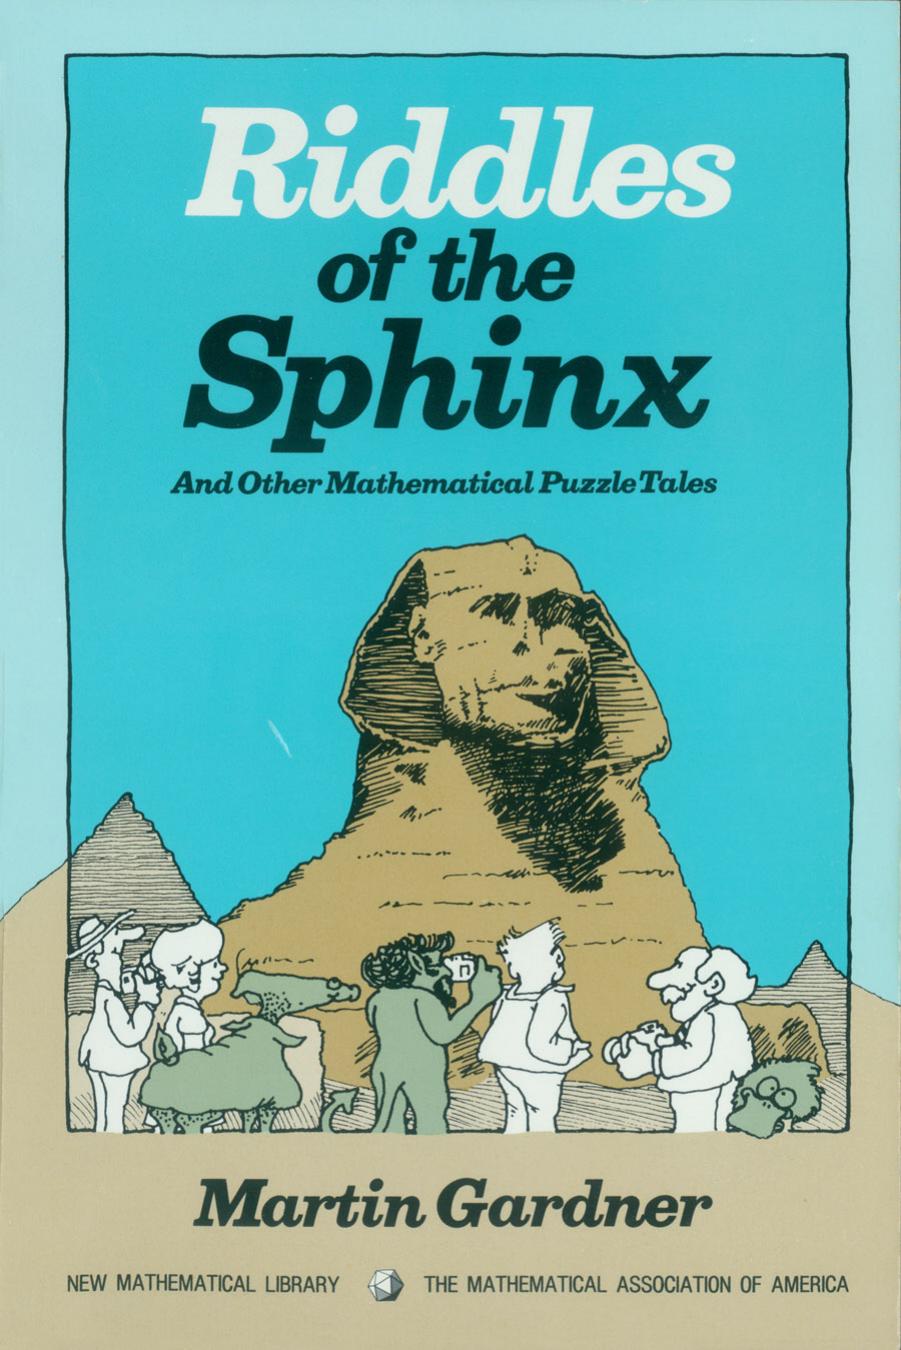 Riddles of the Sphinx: and Other Mathematical Puzzle Tales by Martin Gardner